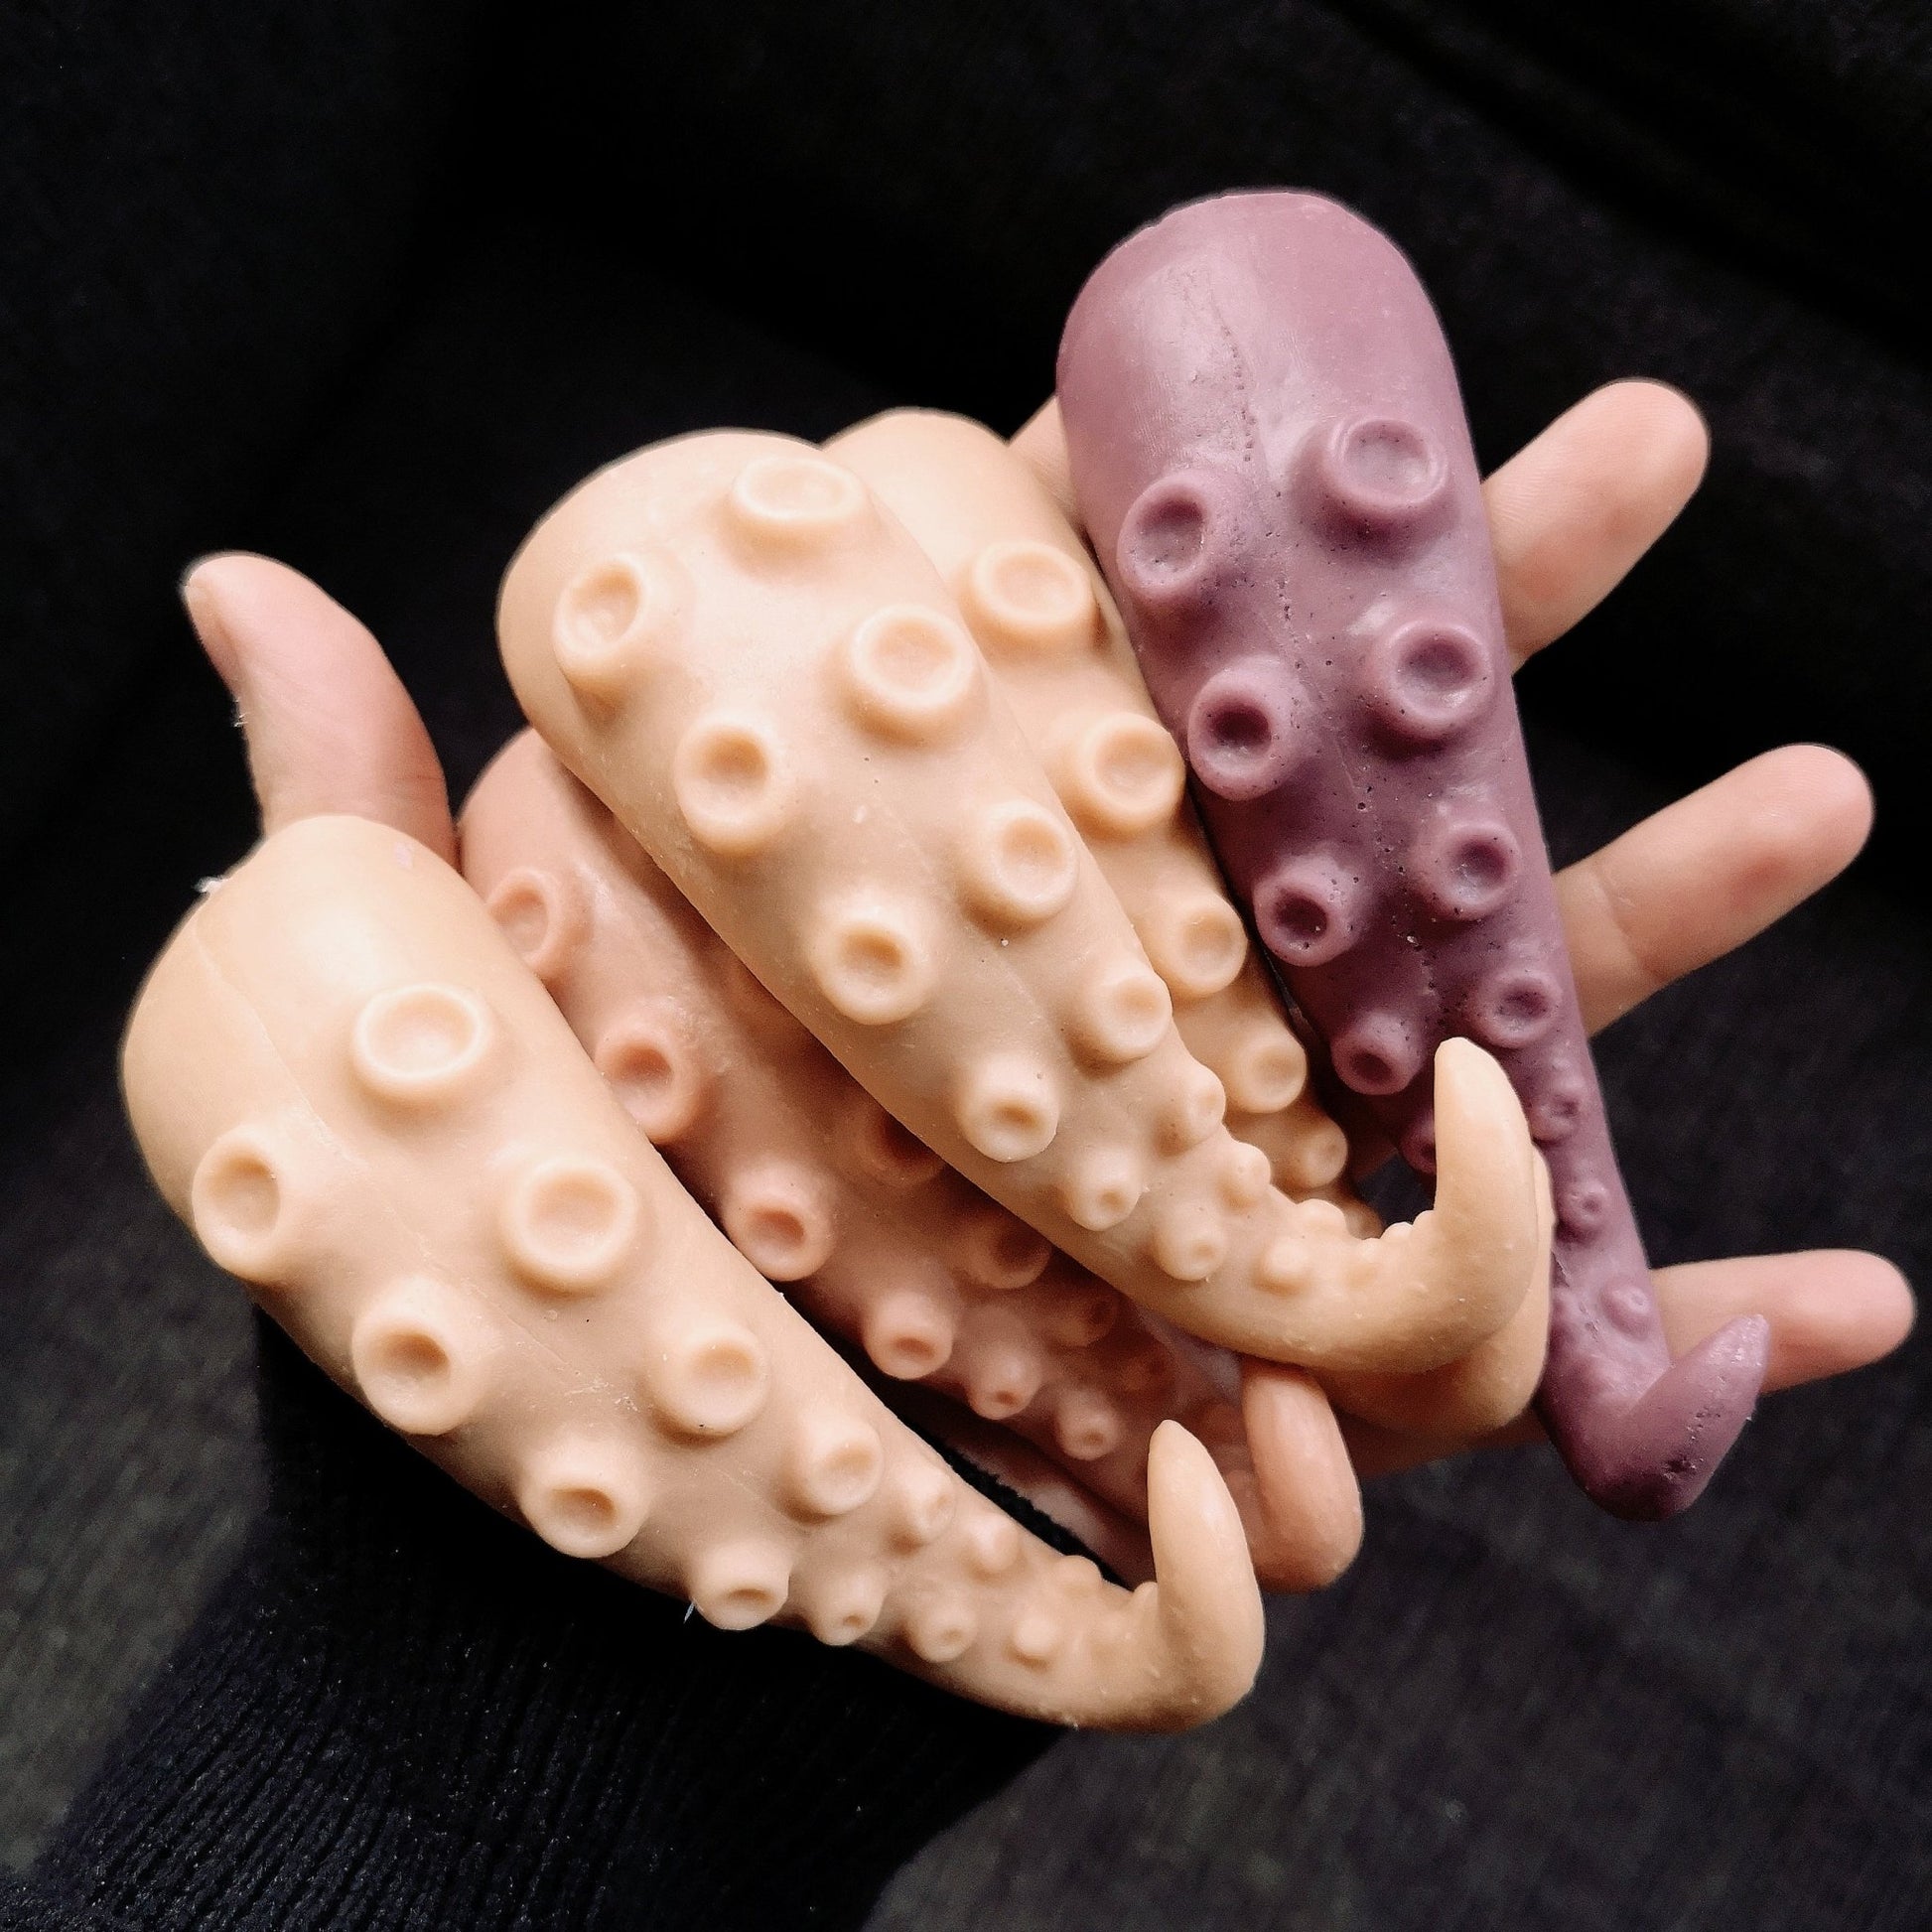 Tentacle Tongue - Silicone makeup props in different custom shades in the palm of a hand